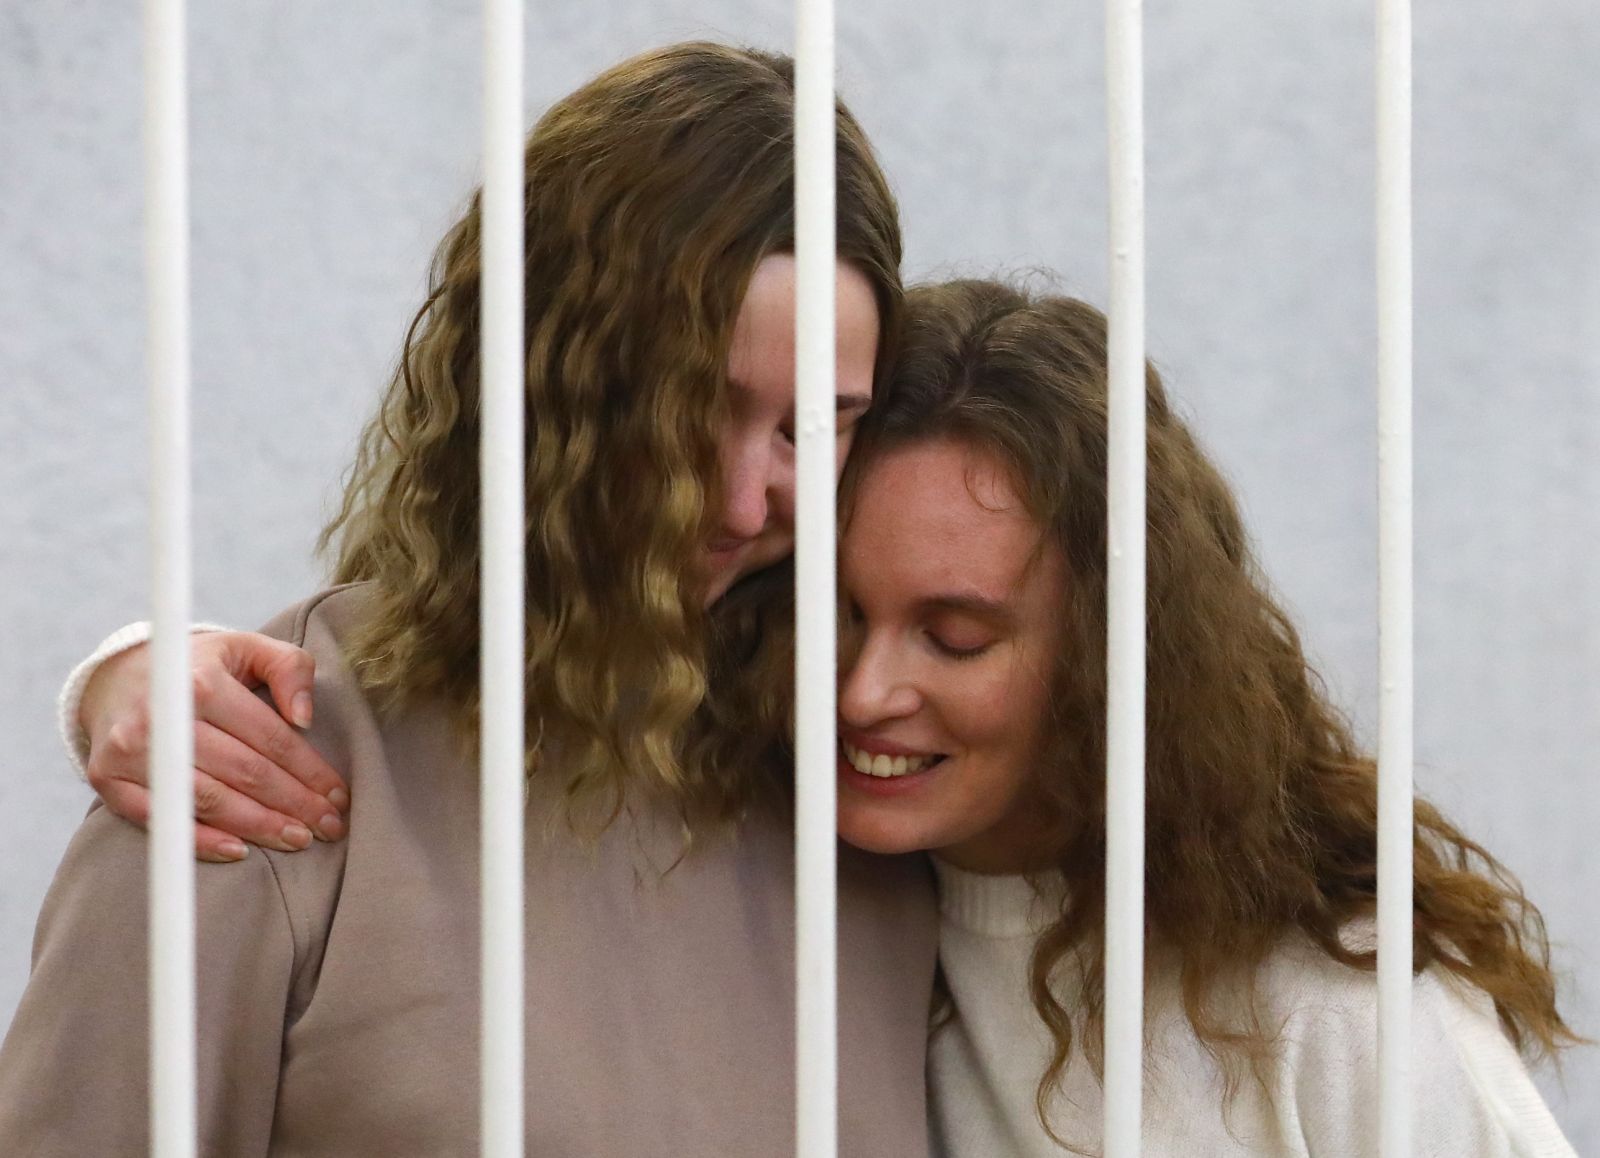 epa08998118 Belsat journalists Katerina Bakhvalova (R) (Andreeva) and Daria Chultsova (L), embrace each other in a cage before the start of a trial in Minsk, Belarus, 09 February 2021. Both journalists were detained in November 2020, when they were reporting on anti-government protests. They face up to three years in prison on charges of organizing and preparing actions that grossly violate public order.  EPA/STRINGER